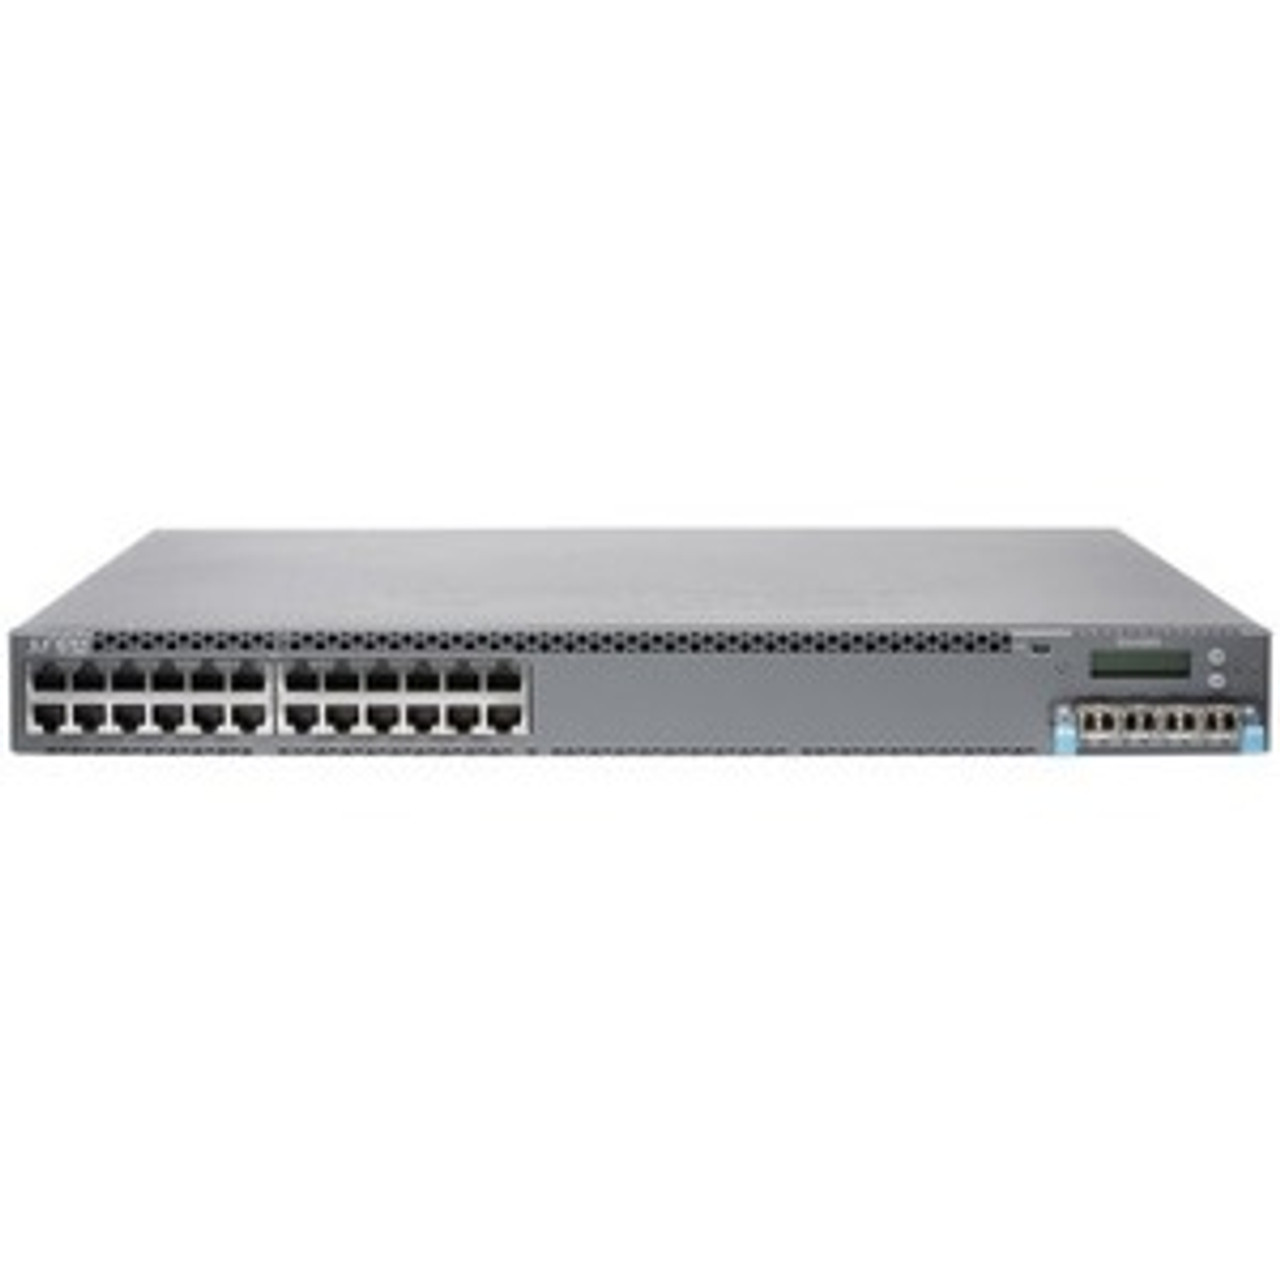 B-EX4300-24T-3C-E Juniper EX4300-24T Ethernet Switch - 24 Ports - Manageable - 3 Layer Supported - Modular - Twisted Pair, Optical Fiber - 1U High - Rack-mountable,